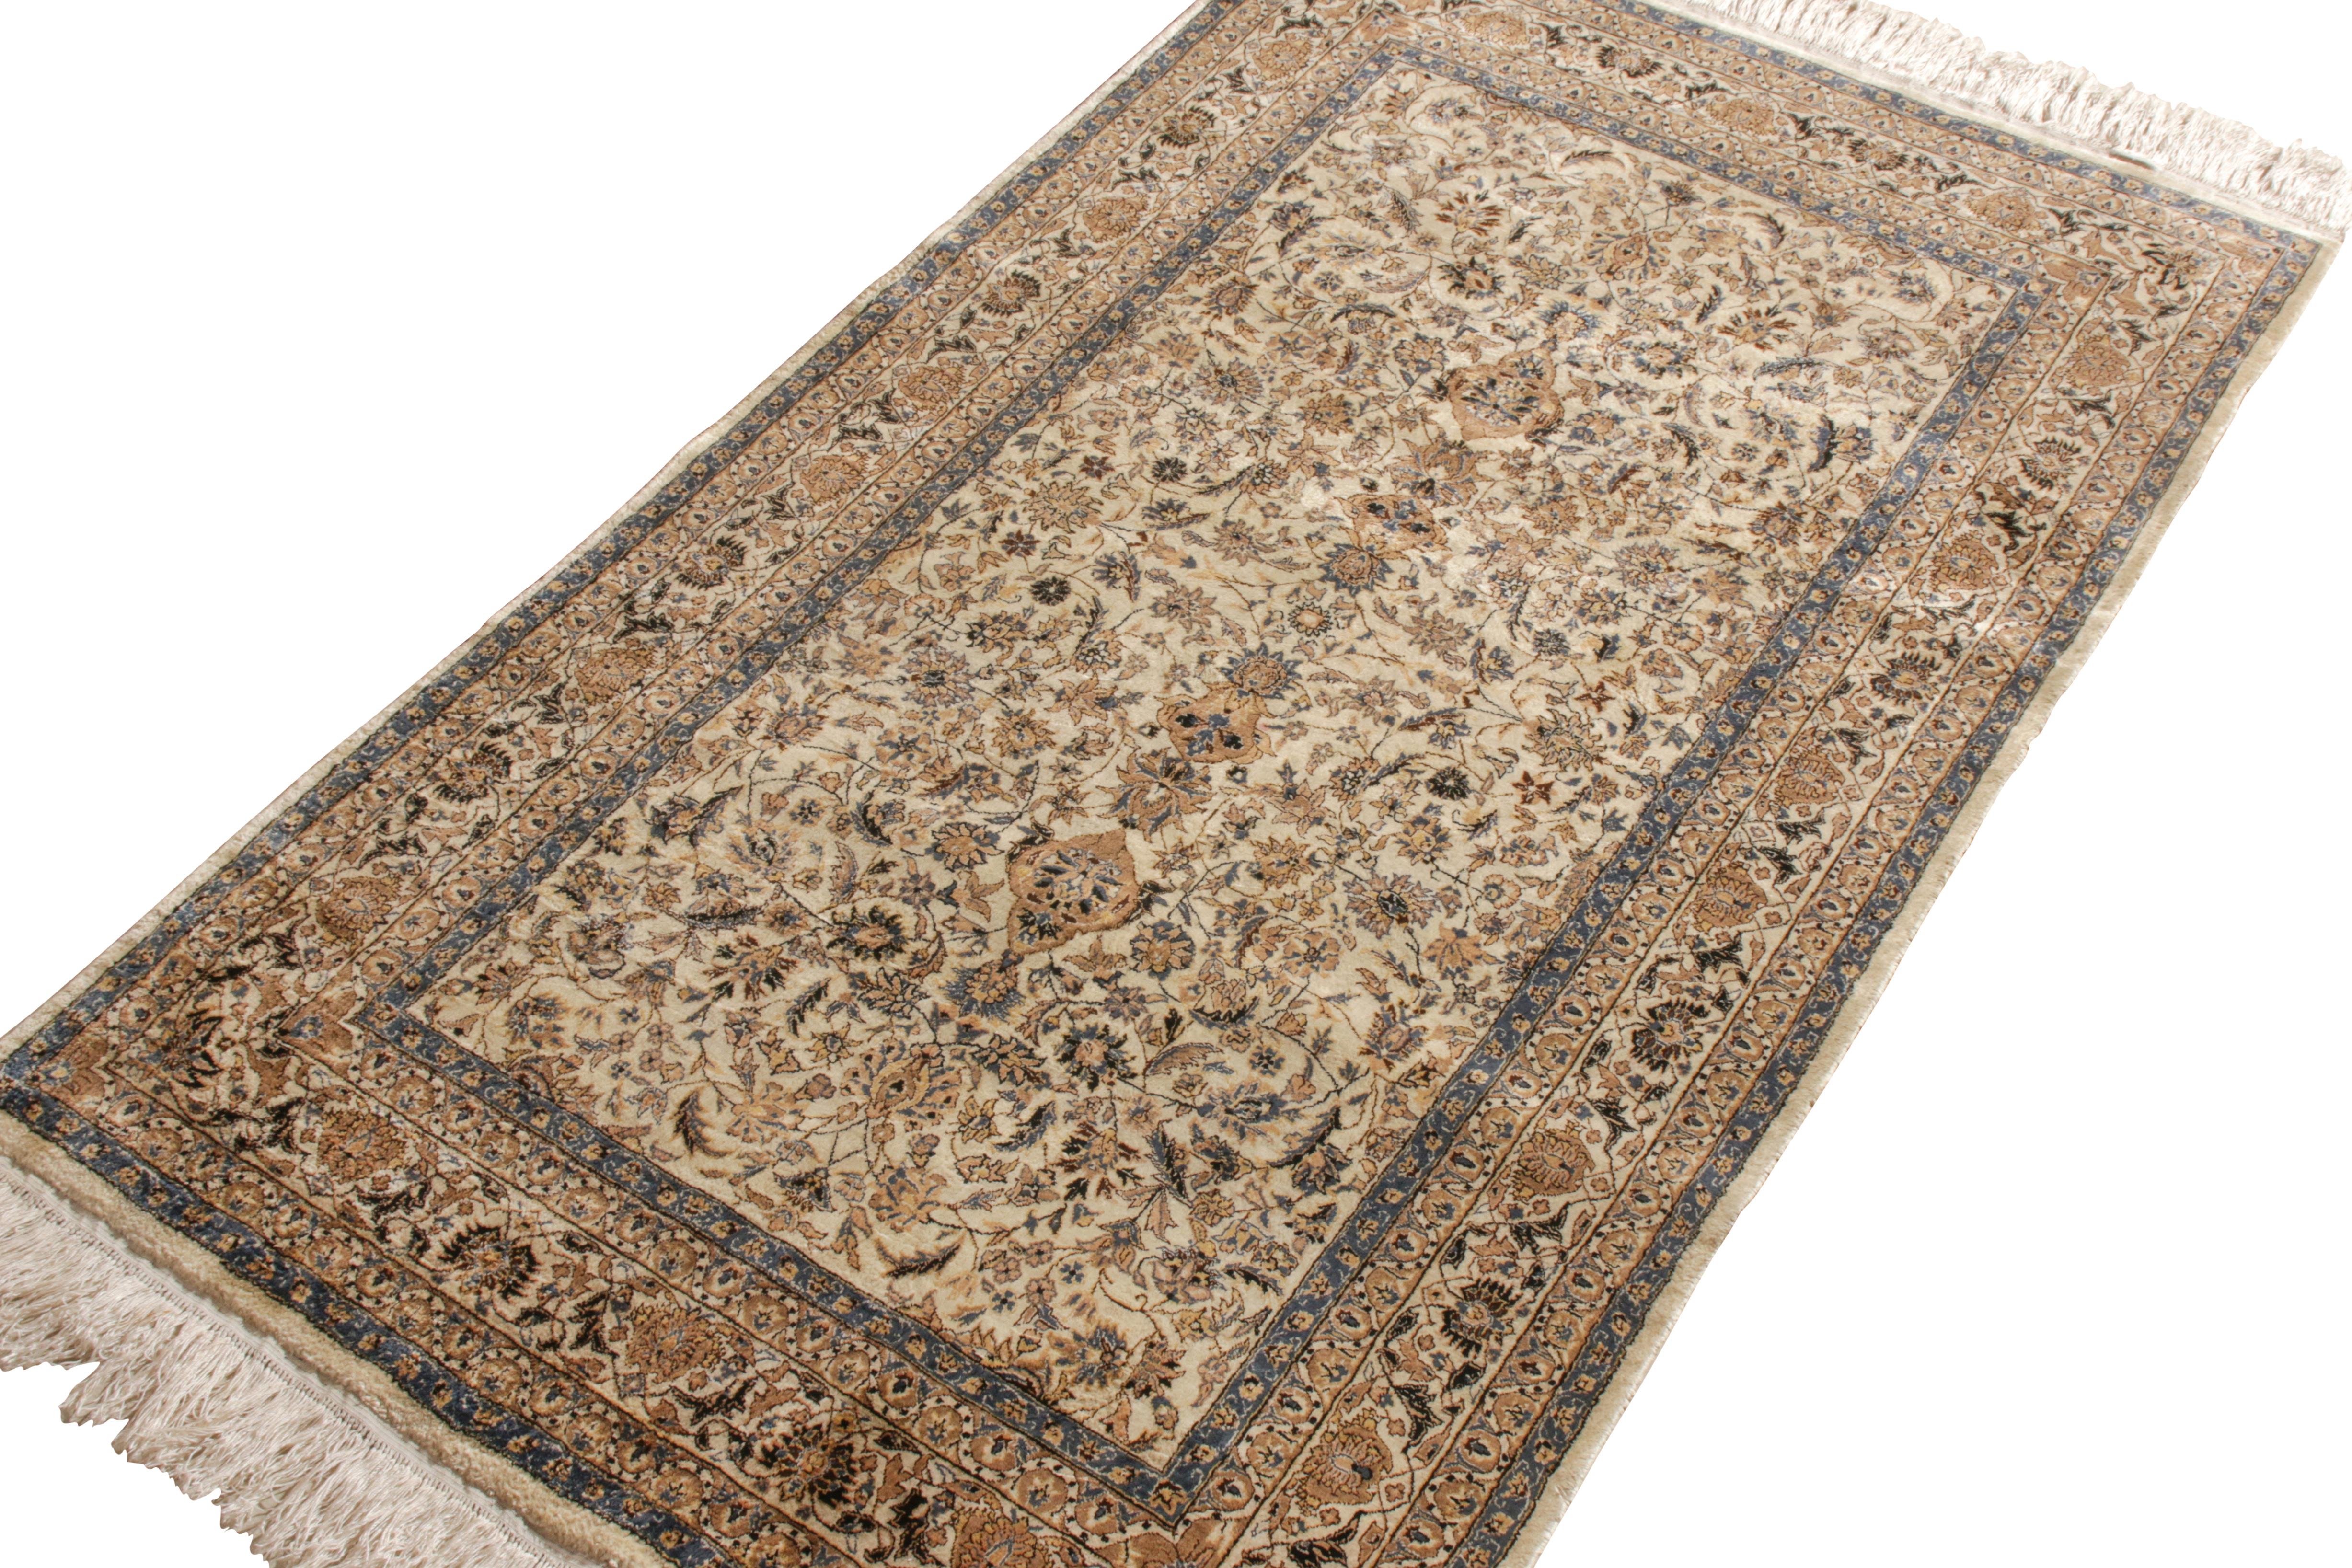 Hand-Knotted Vintage Persian Rug in Beige-Brown Floral Pattern by Rug & Kilim In Good Condition For Sale In Long Island City, NY